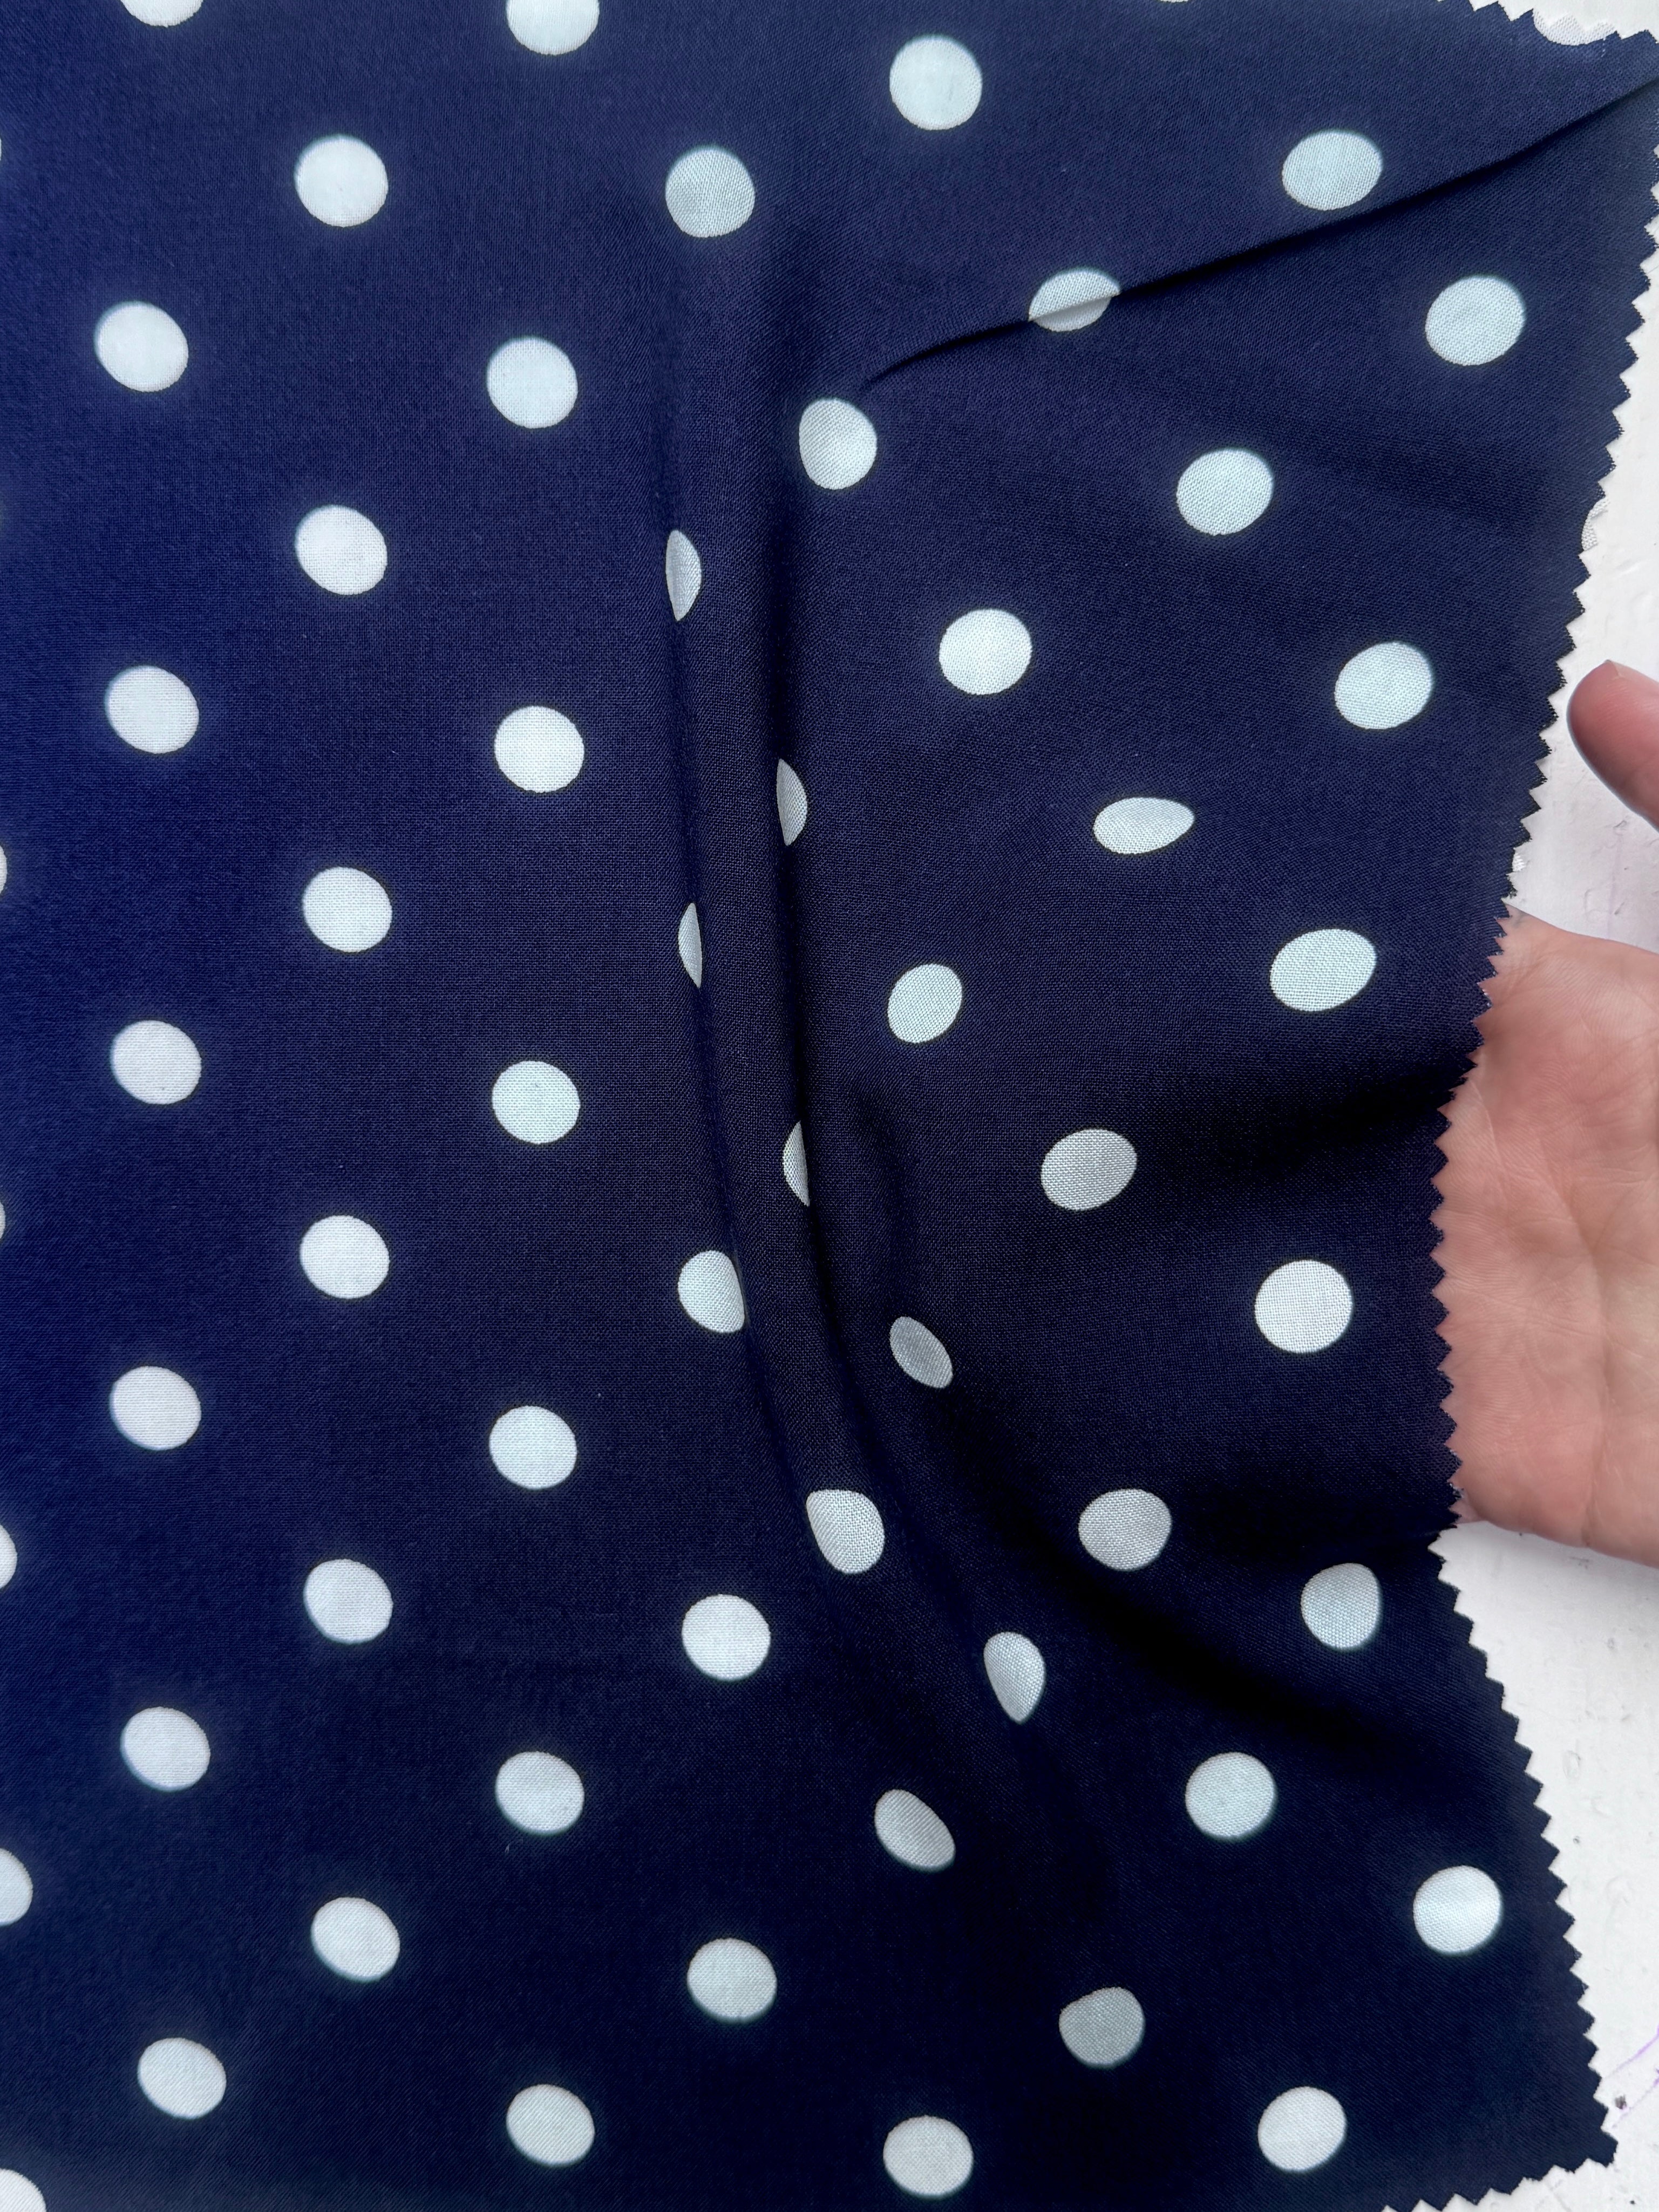 Navy Polka dots on White Rayon Challis, online textile store, sewing, fabric store, sewing store, cheap fabric store, kiki textiles